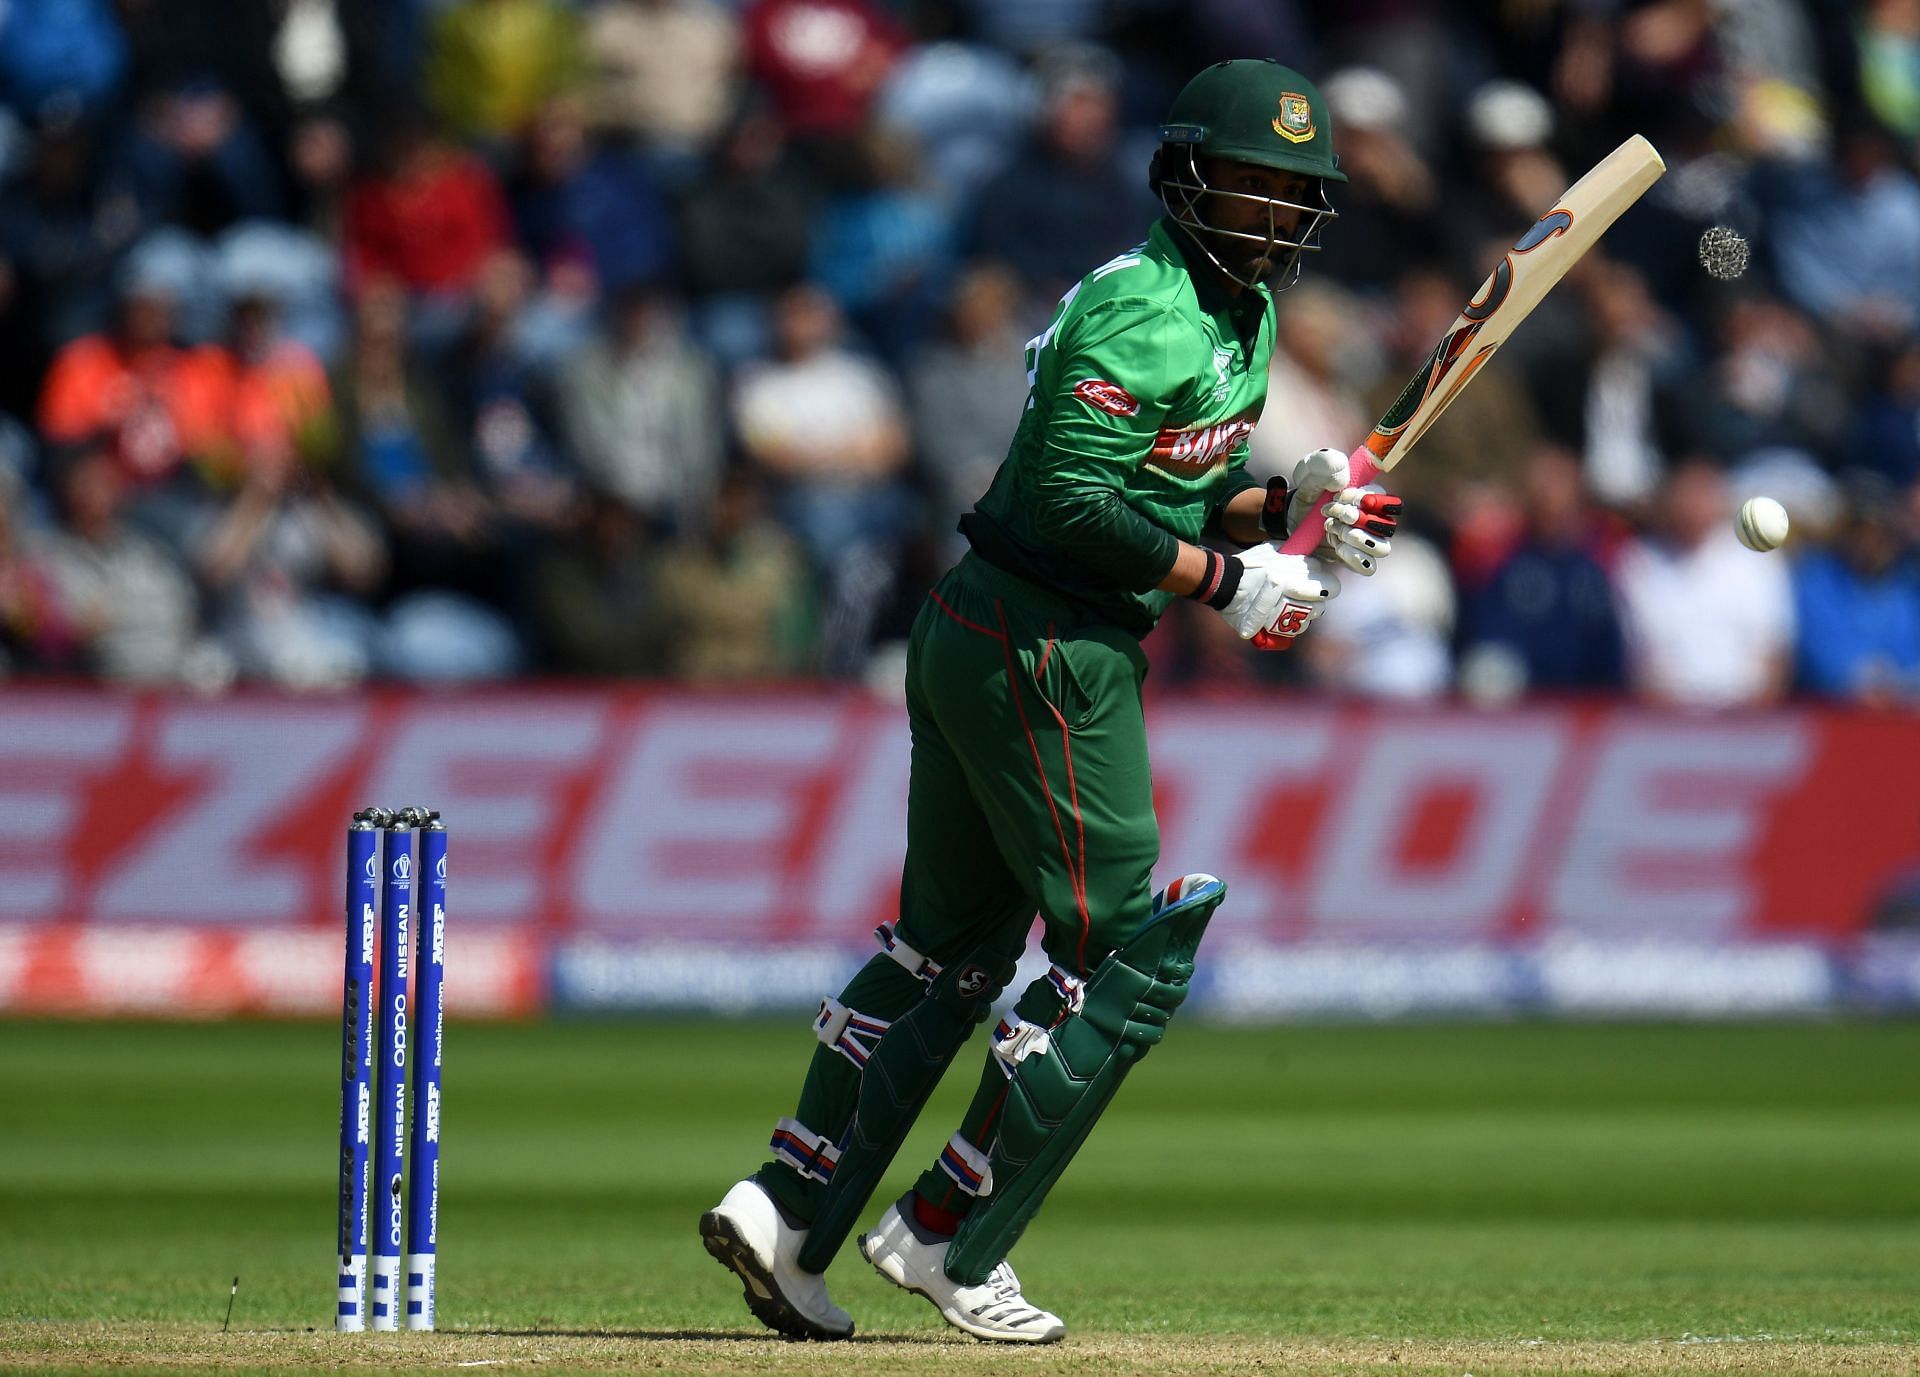 Tamim Iqbal during the 2019 World Cup. (Credits: Getty)